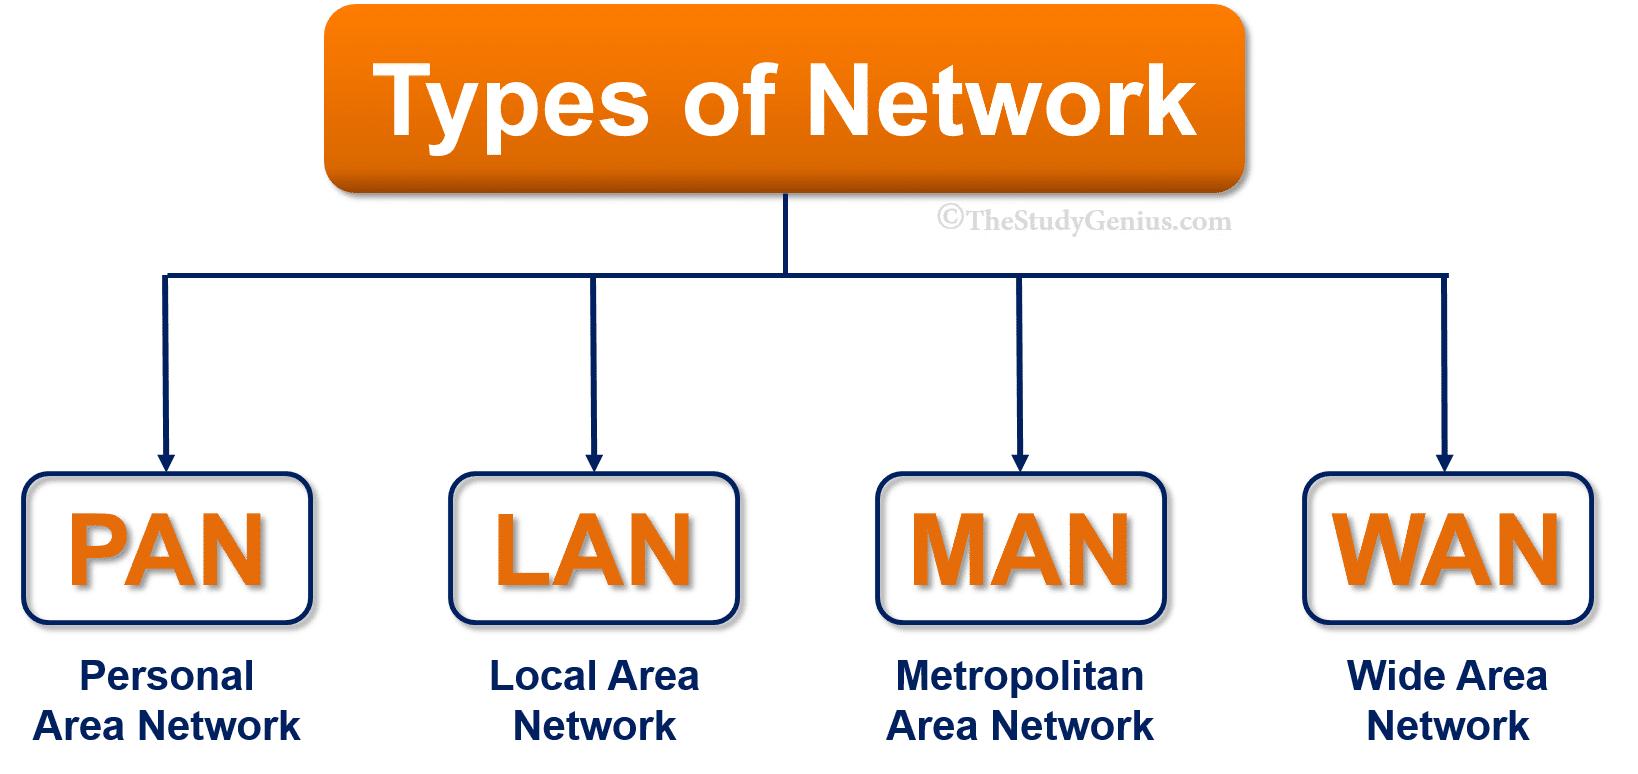 LAN and WAN: Differences